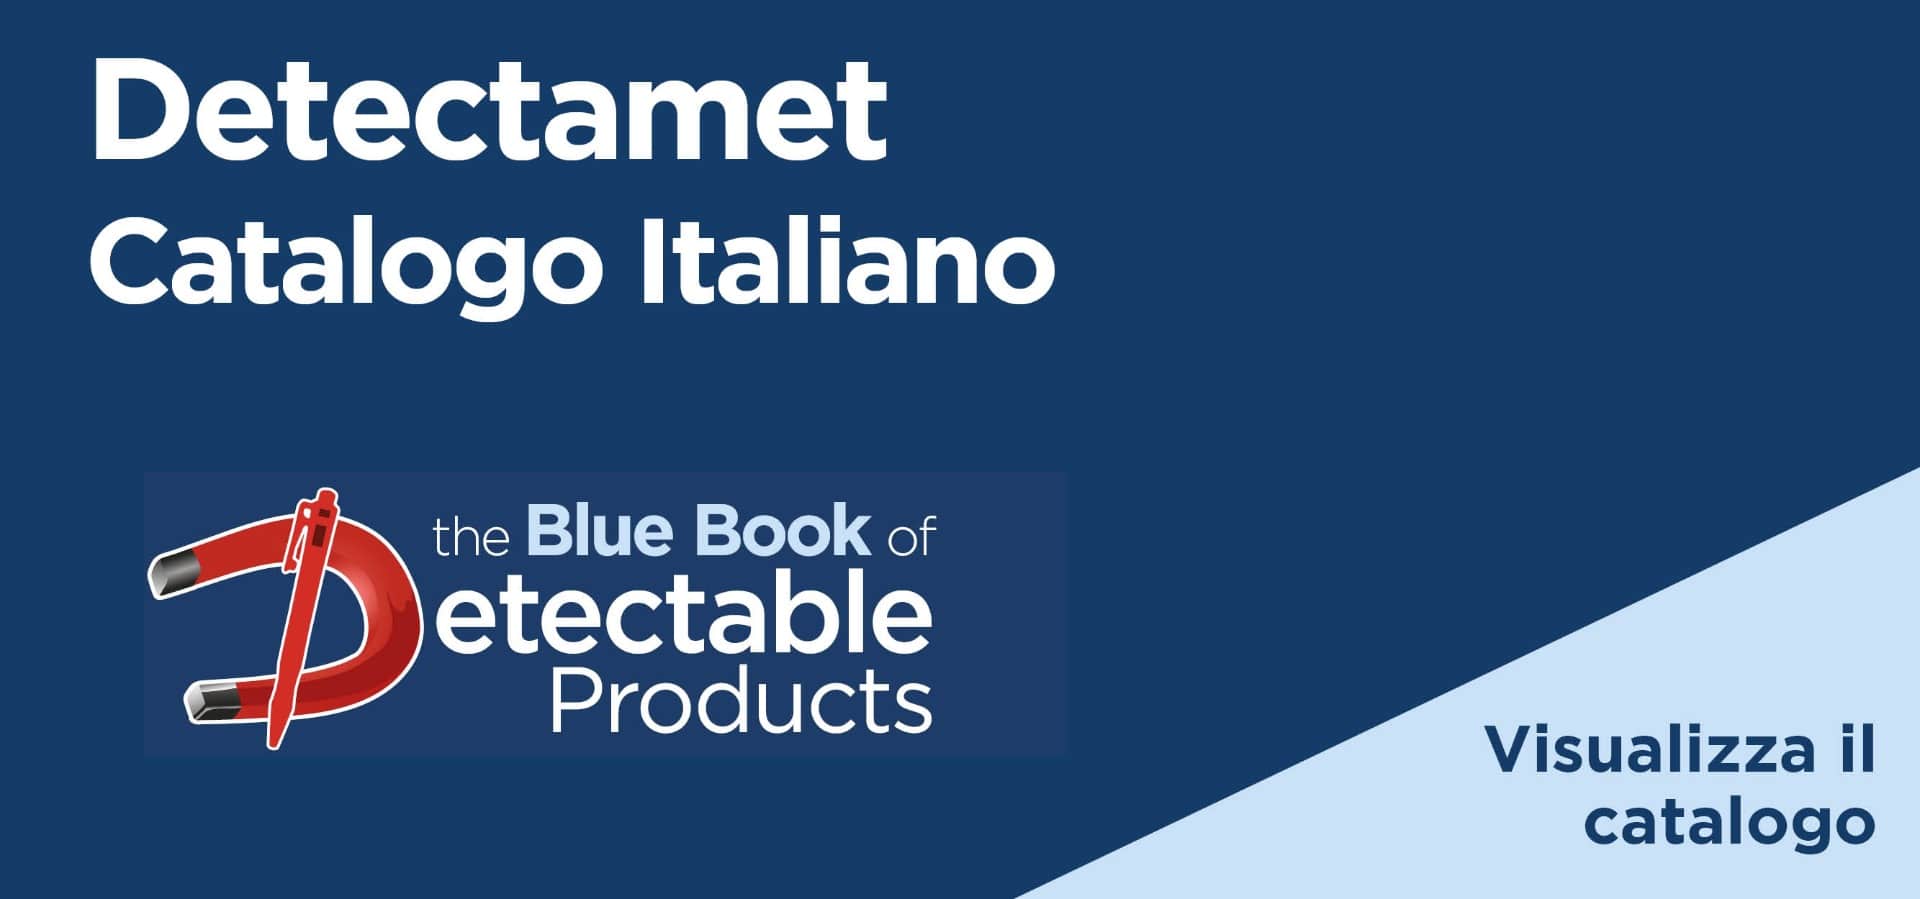 The Blue Book of Detectable Products - Detectamet Product Catalogue